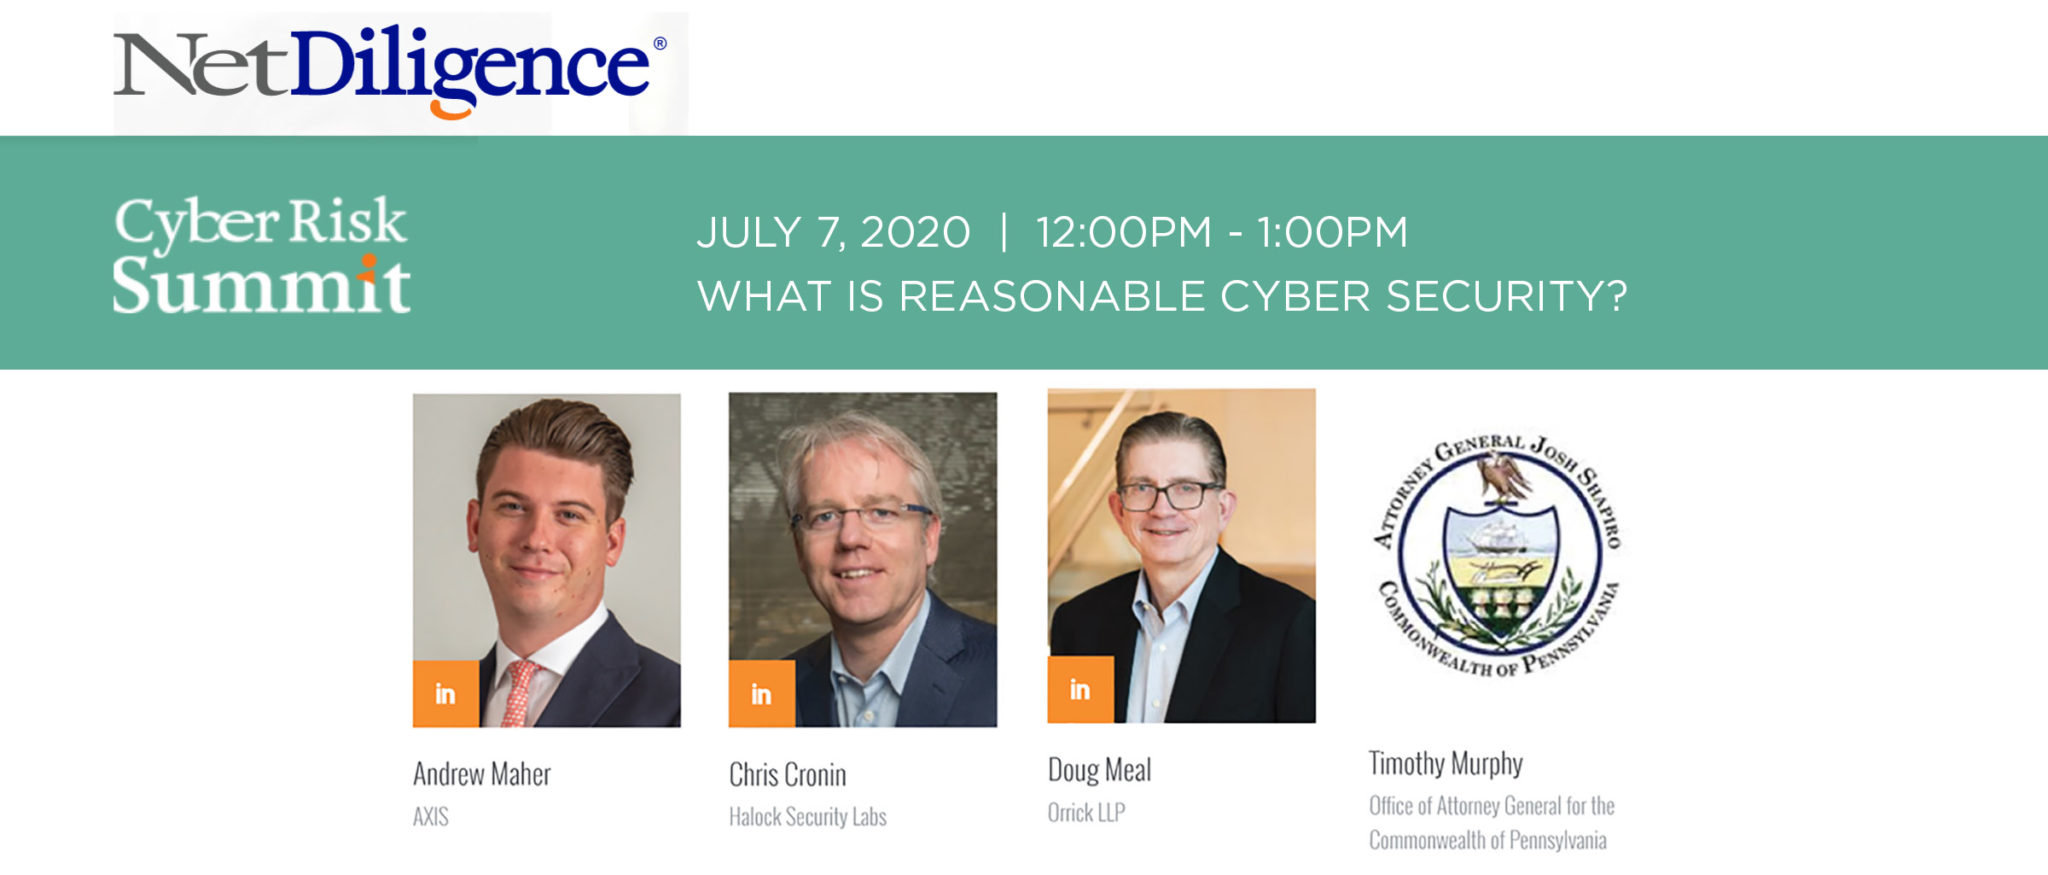 NetDiligence Cyber Security Summit What is Reasonable Security?